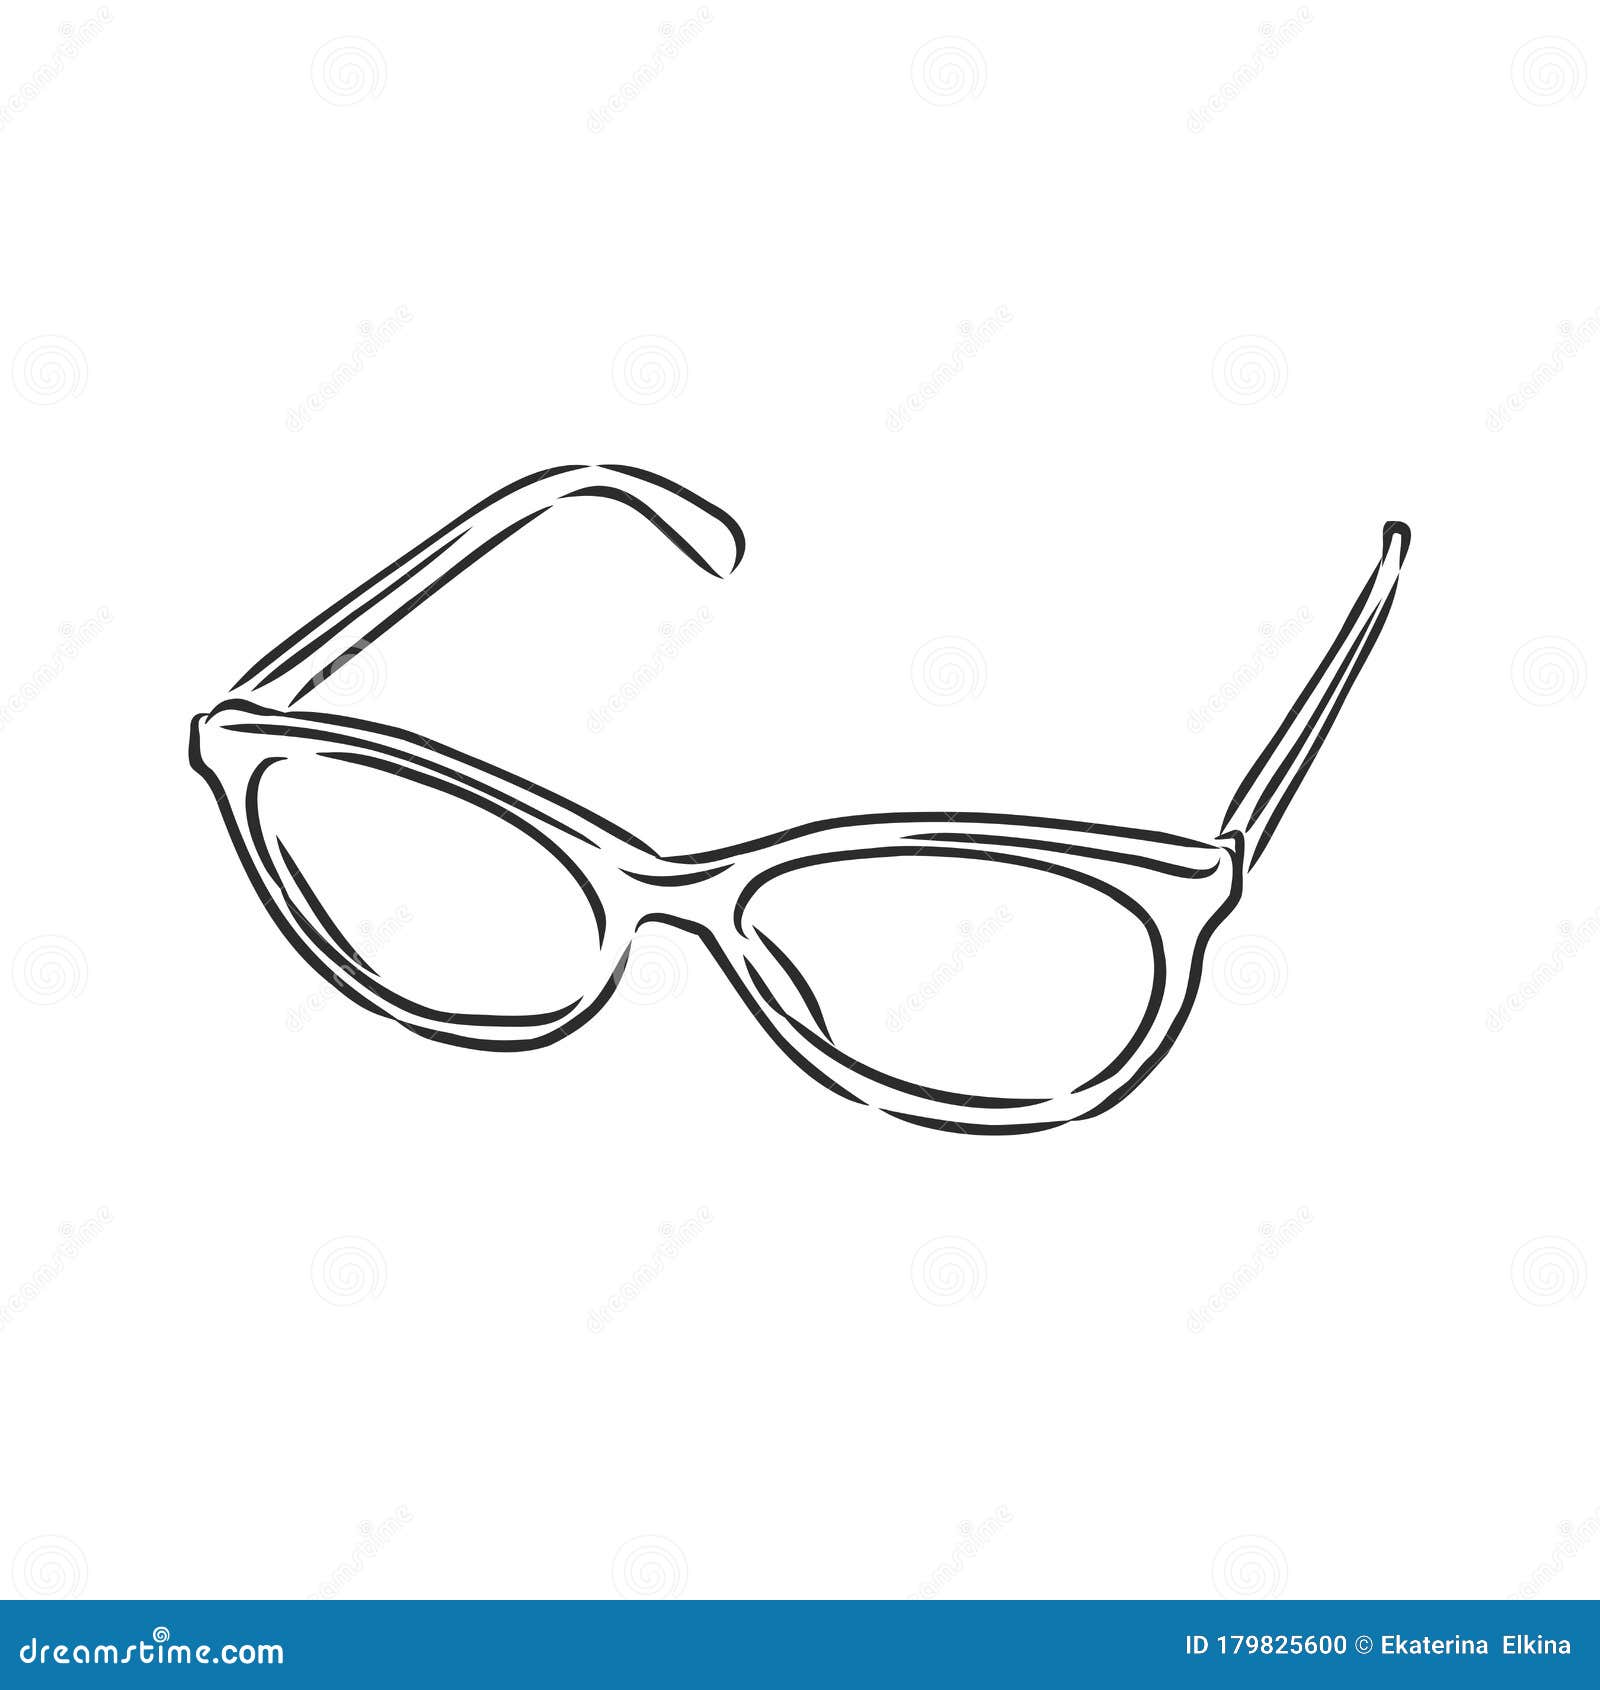 Doodle outline vector illustration of sunglasses cute summer doodle black and white line art coloring page for children stock illustration